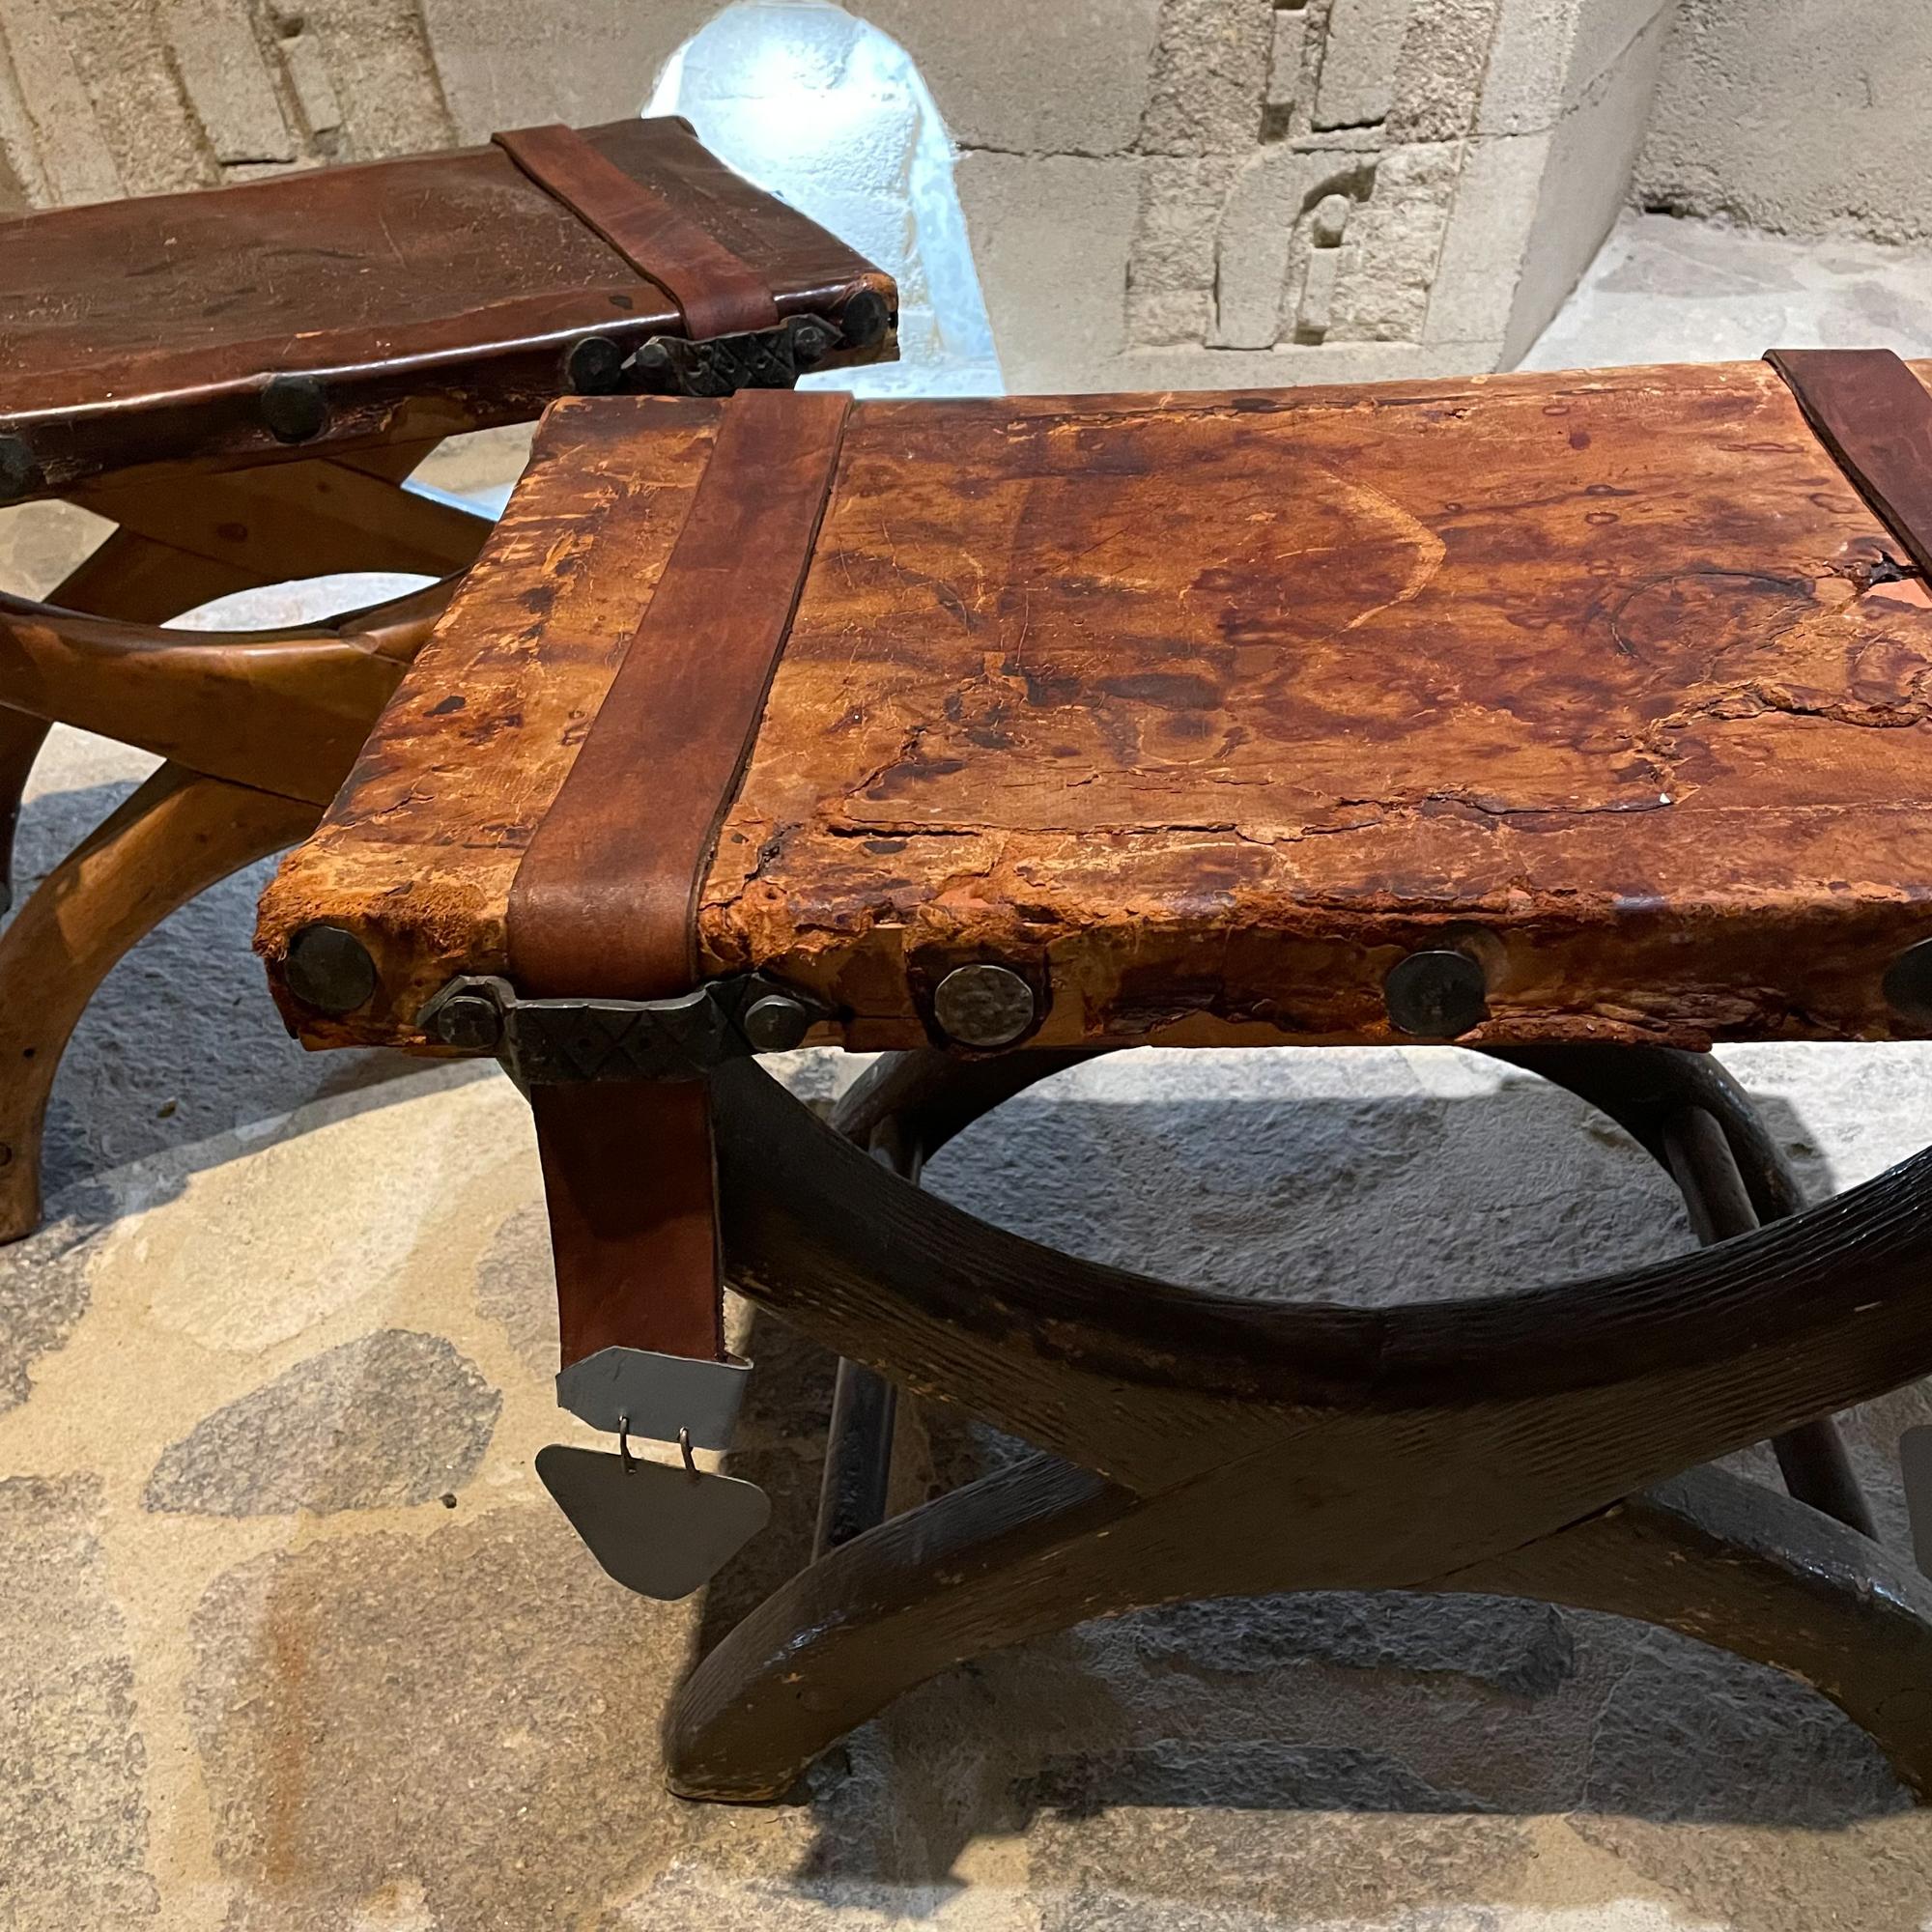 1940s Spanish colonial curule stools made in Mexico. Set of two.
Latin American rustic leather seat and strap. Fabulous medallions.
In the style of Clara Porset & Luis Barragan. 
Similar to Miguelito Butaque.
Unmarked. 
Features weathered patina,